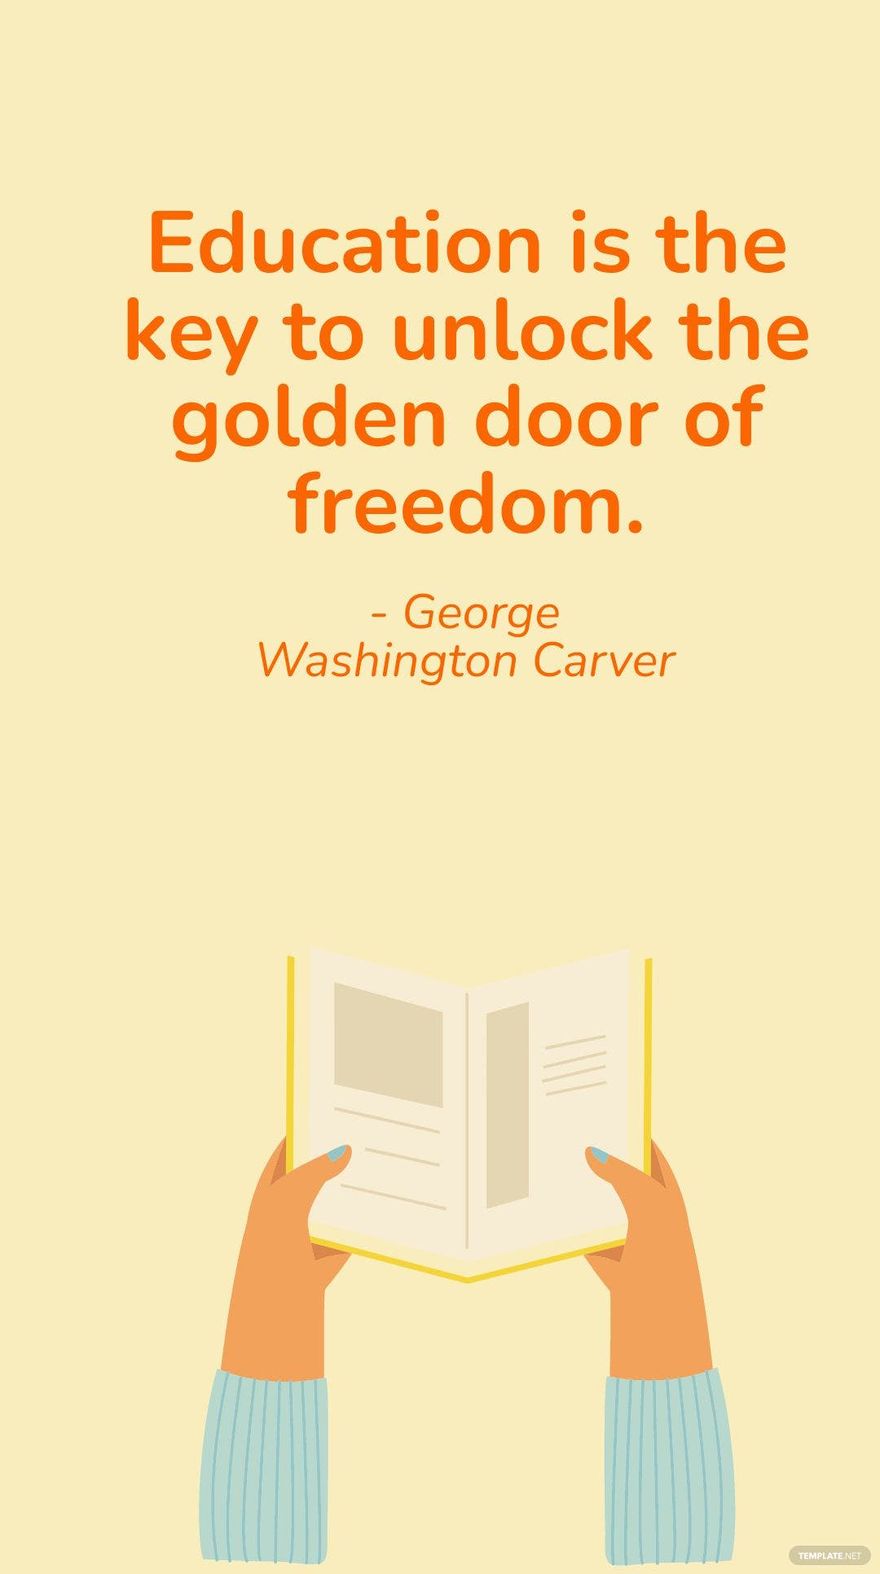 George Washington Carver - Education is the key to unlock the golden door of freedom. in JPG